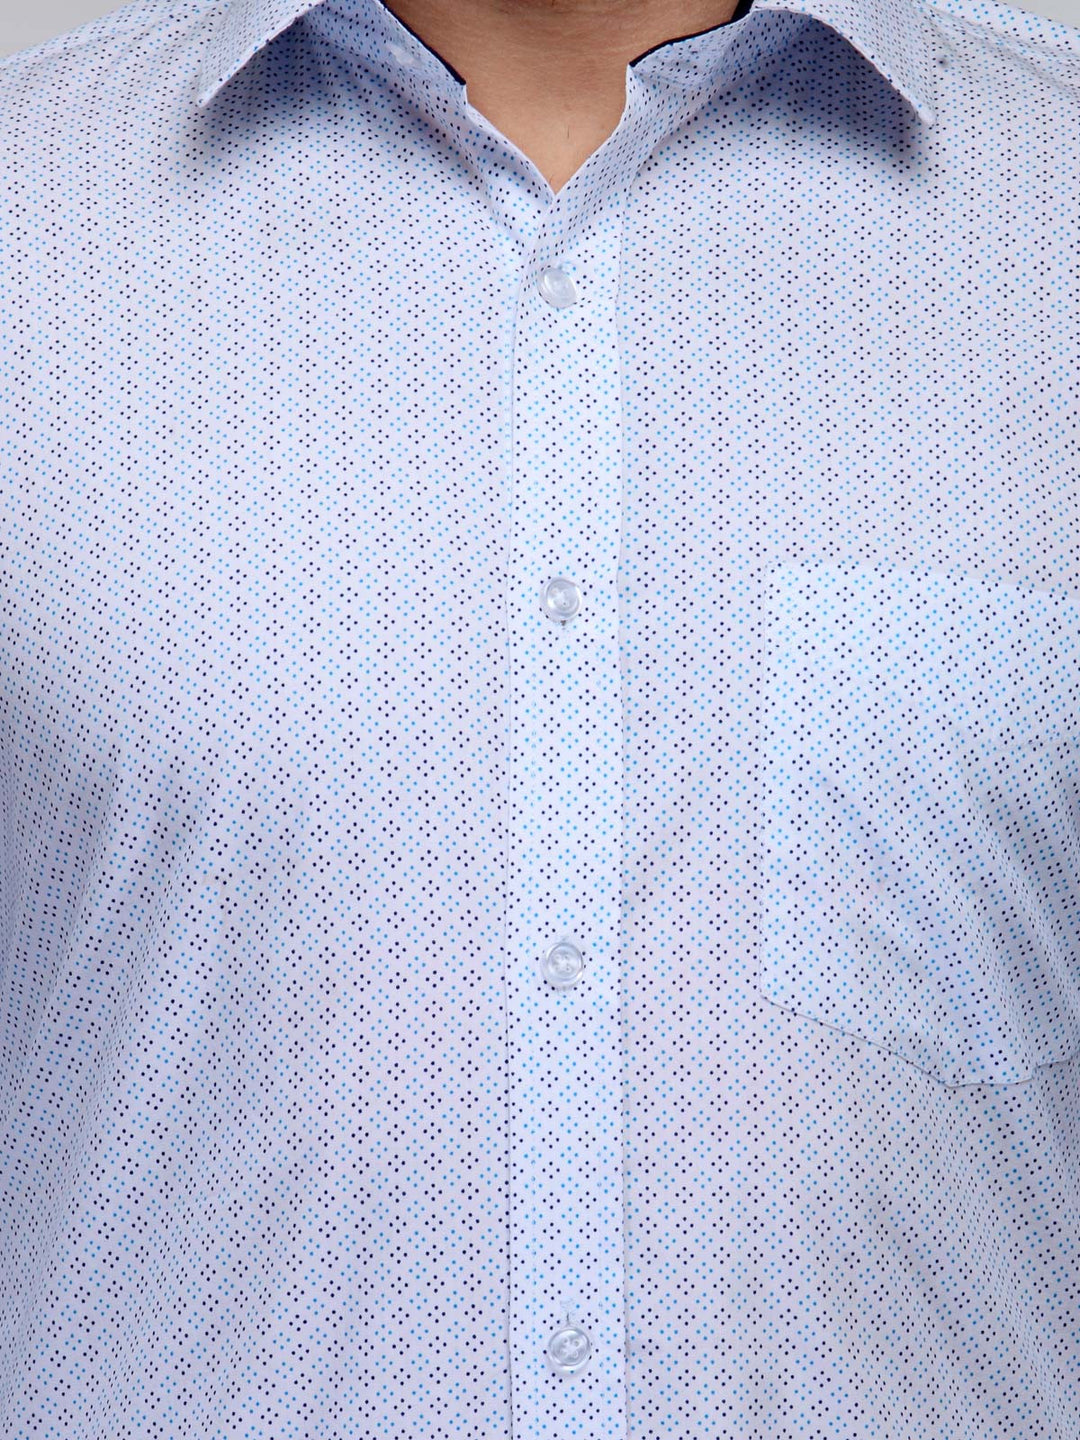 Men White and Blue Slim Fit Print Pure Cotton Formal Shirt